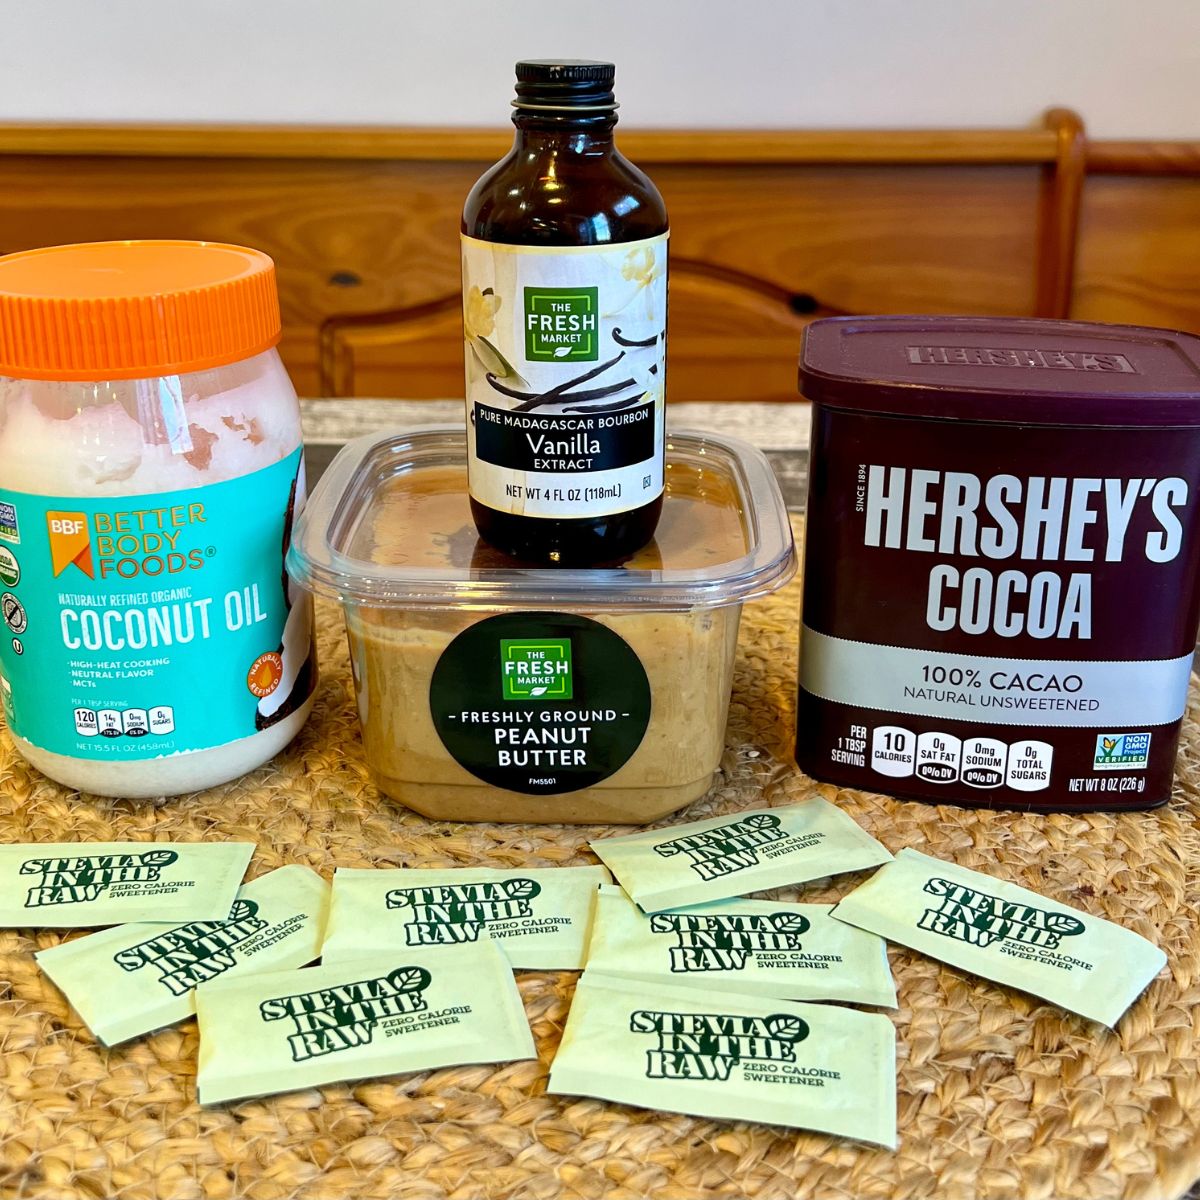 A jar of coconut oil,a bottle of vanilla extract, a container of peanut butter, a container of Hershey's unsweetened cocoa powder and packets of Stevia on a table